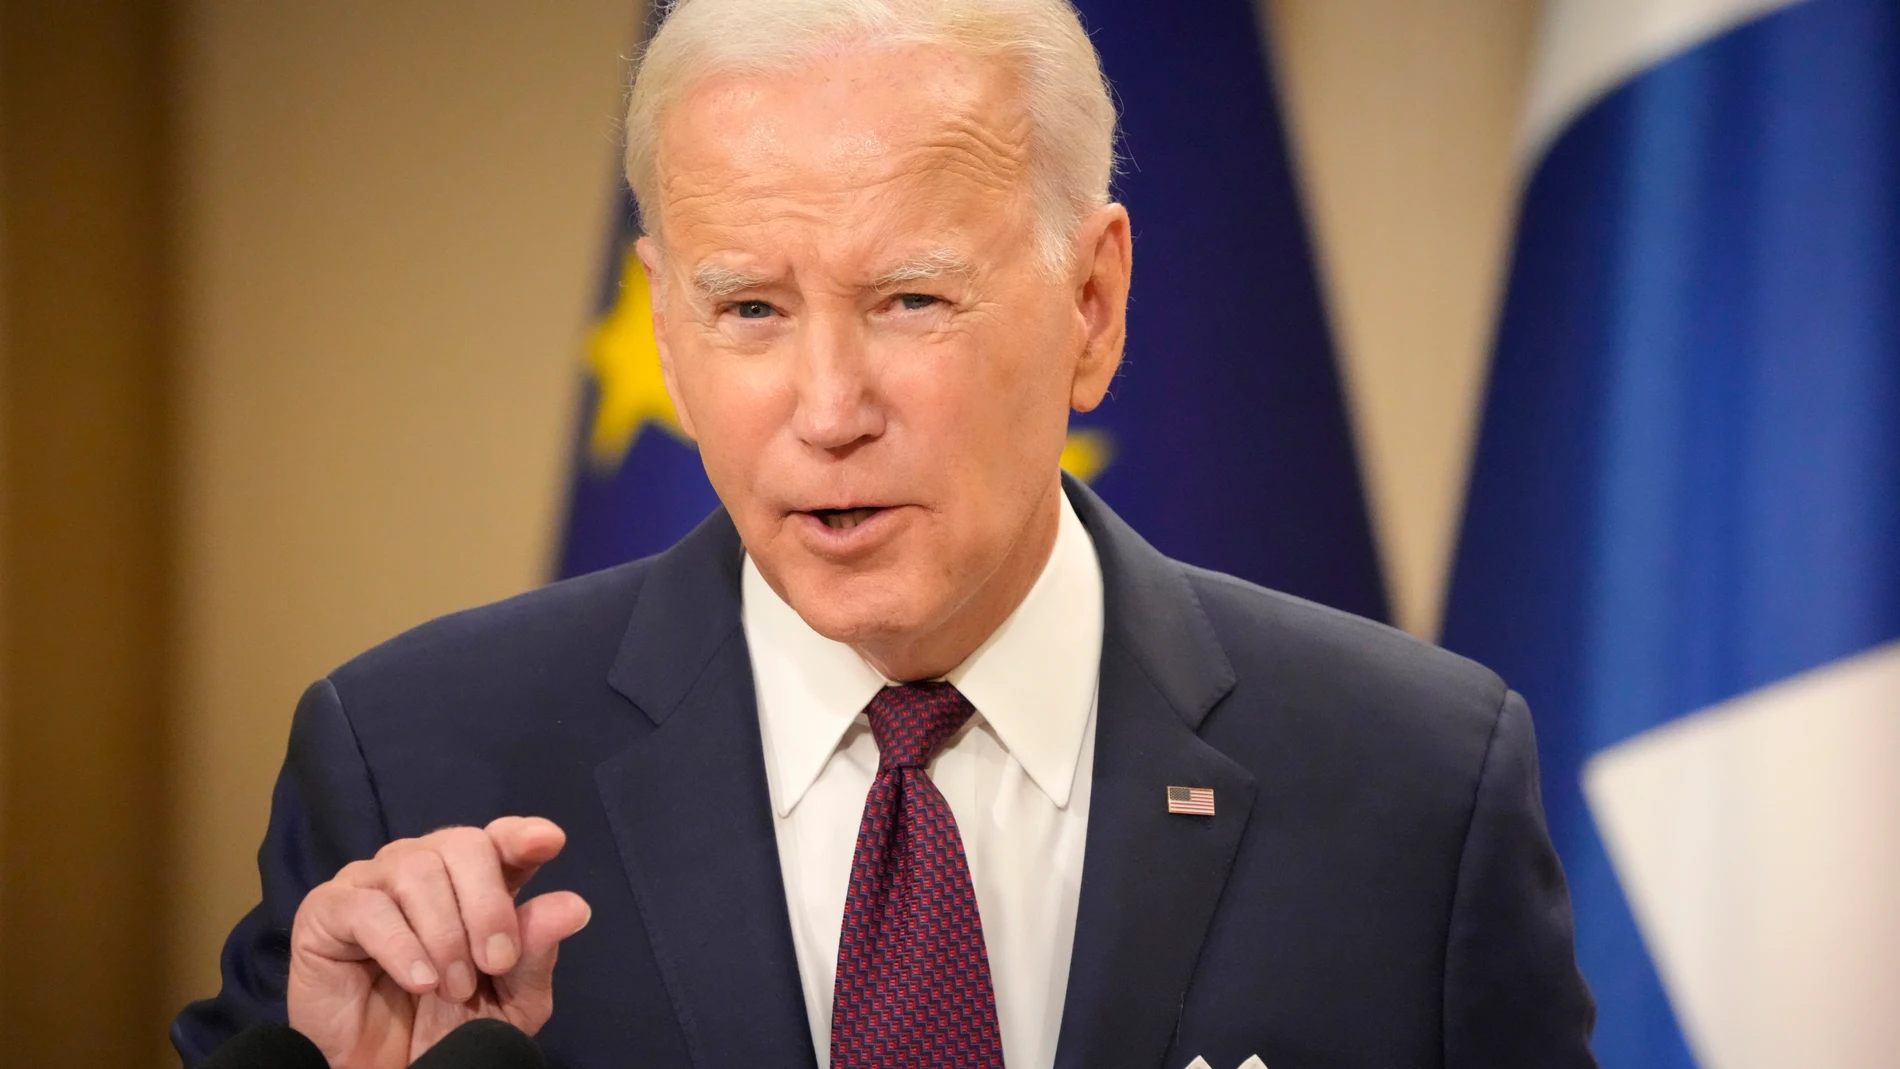 U.S. President Joe Biden gestures during a press conference in Helsinki, Finland, Thursday, July 13, 2023. Biden is in Finland to attend the US–Nordic Leaders' Summit. (AP Photo/Sergei Grits)